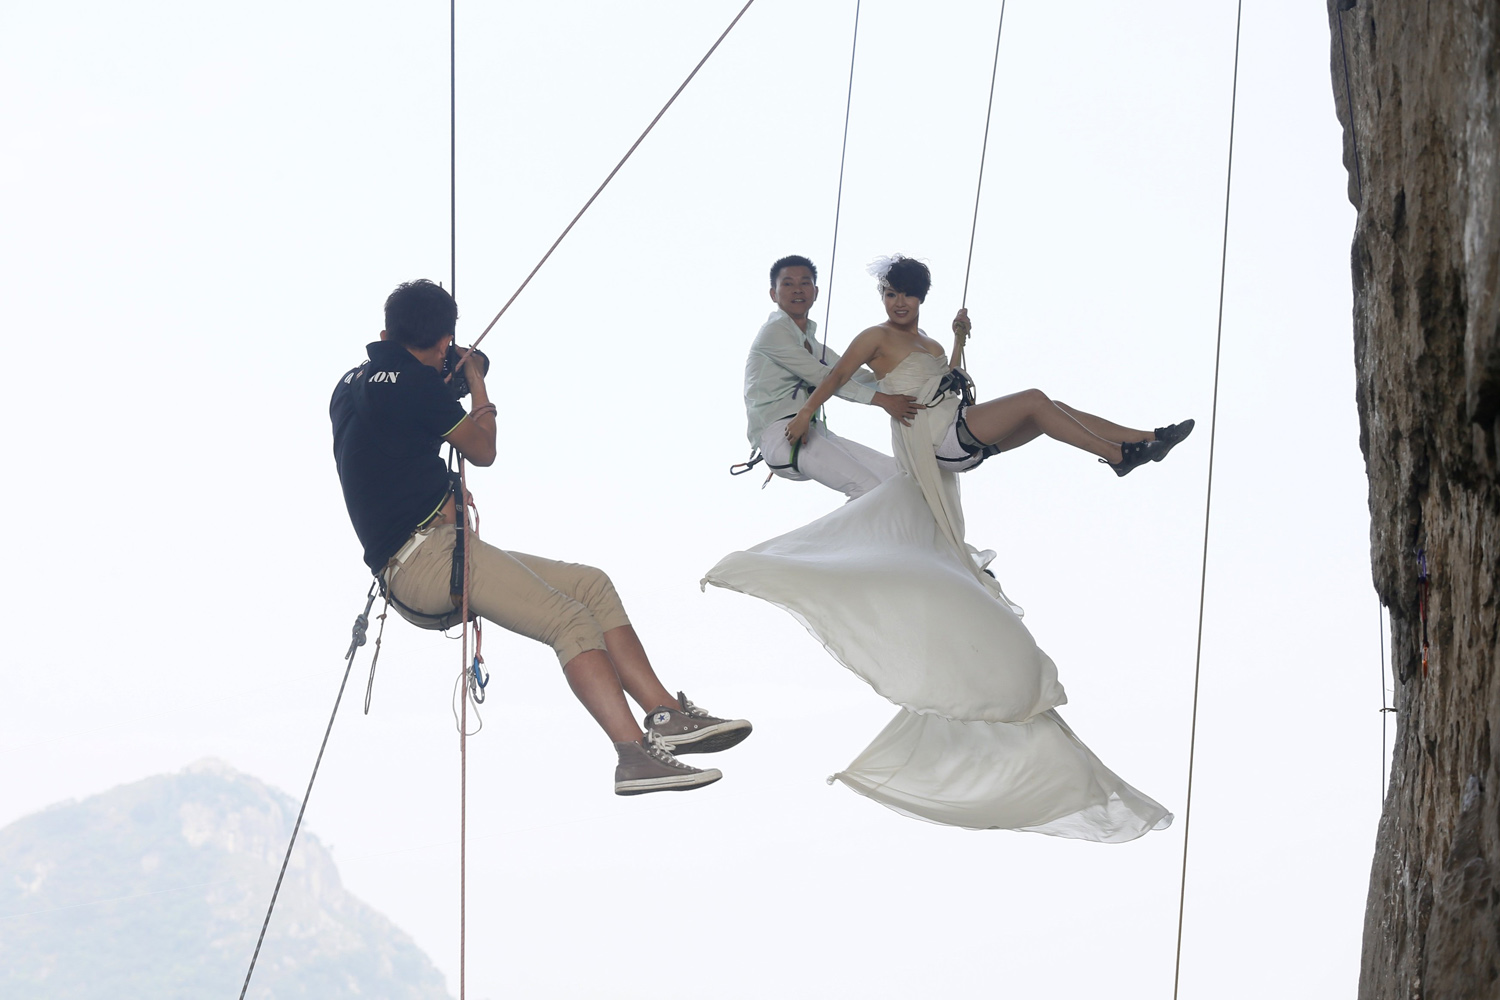 Oct. 26, 2013. A photographer takes pictures of Fang Jing (R) in a wedding gown next to her husband, surnamed Zhao, as they hang from a cliff during a rock climbing exercise in Liuzhou, Guangxi Zhuang Autonomous Region, China.